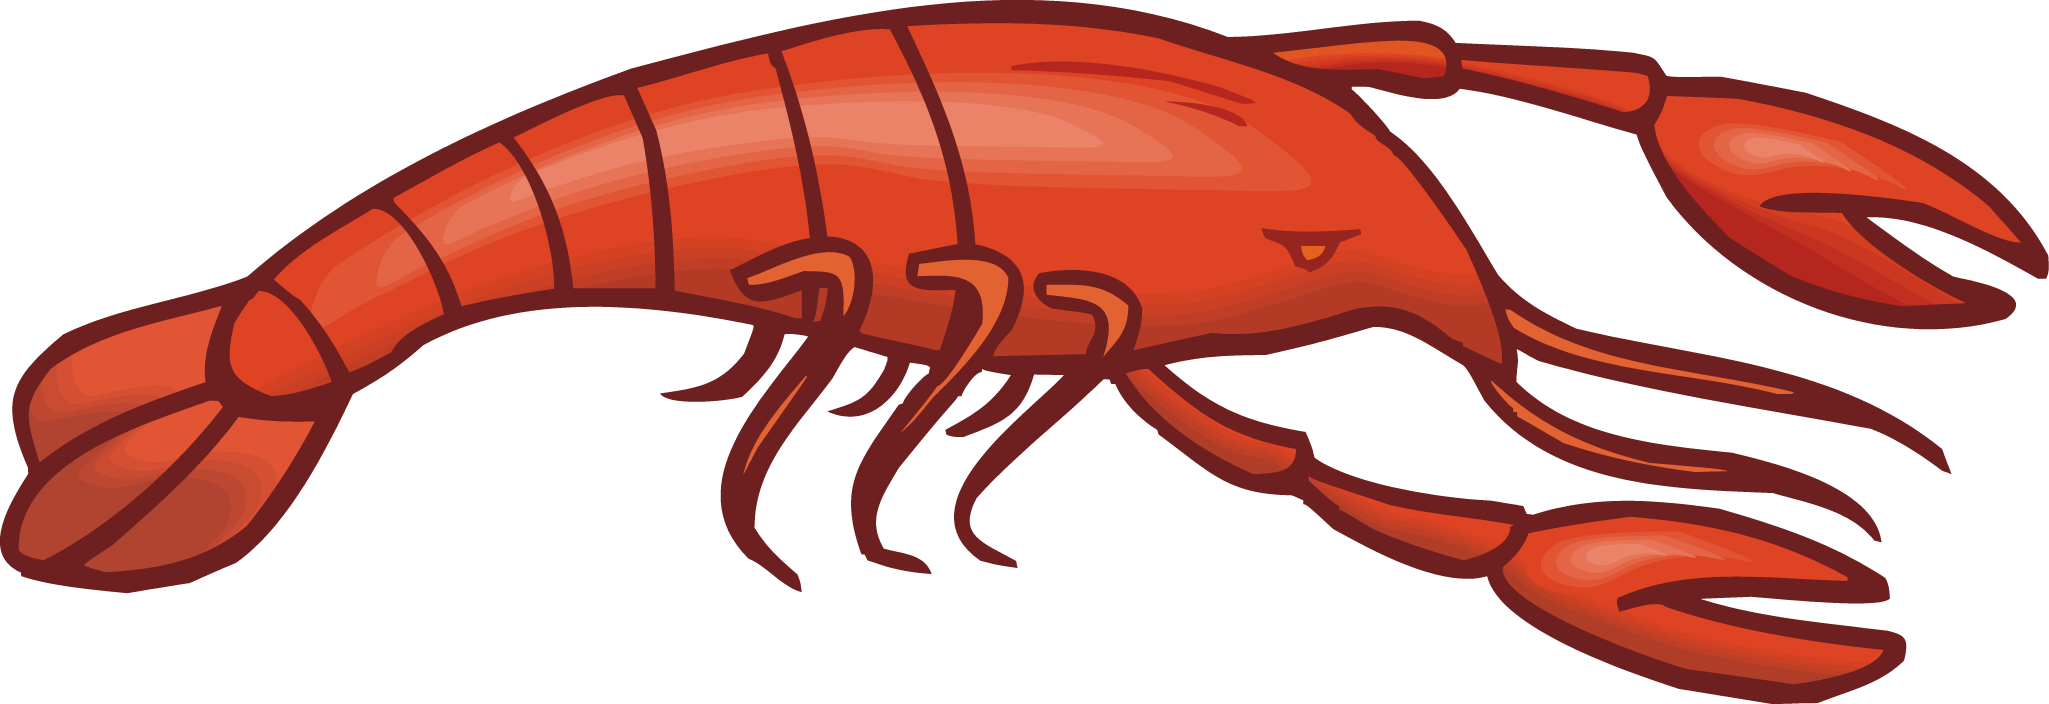 Lobster shellfish pencil and. Clam clipart shell fish